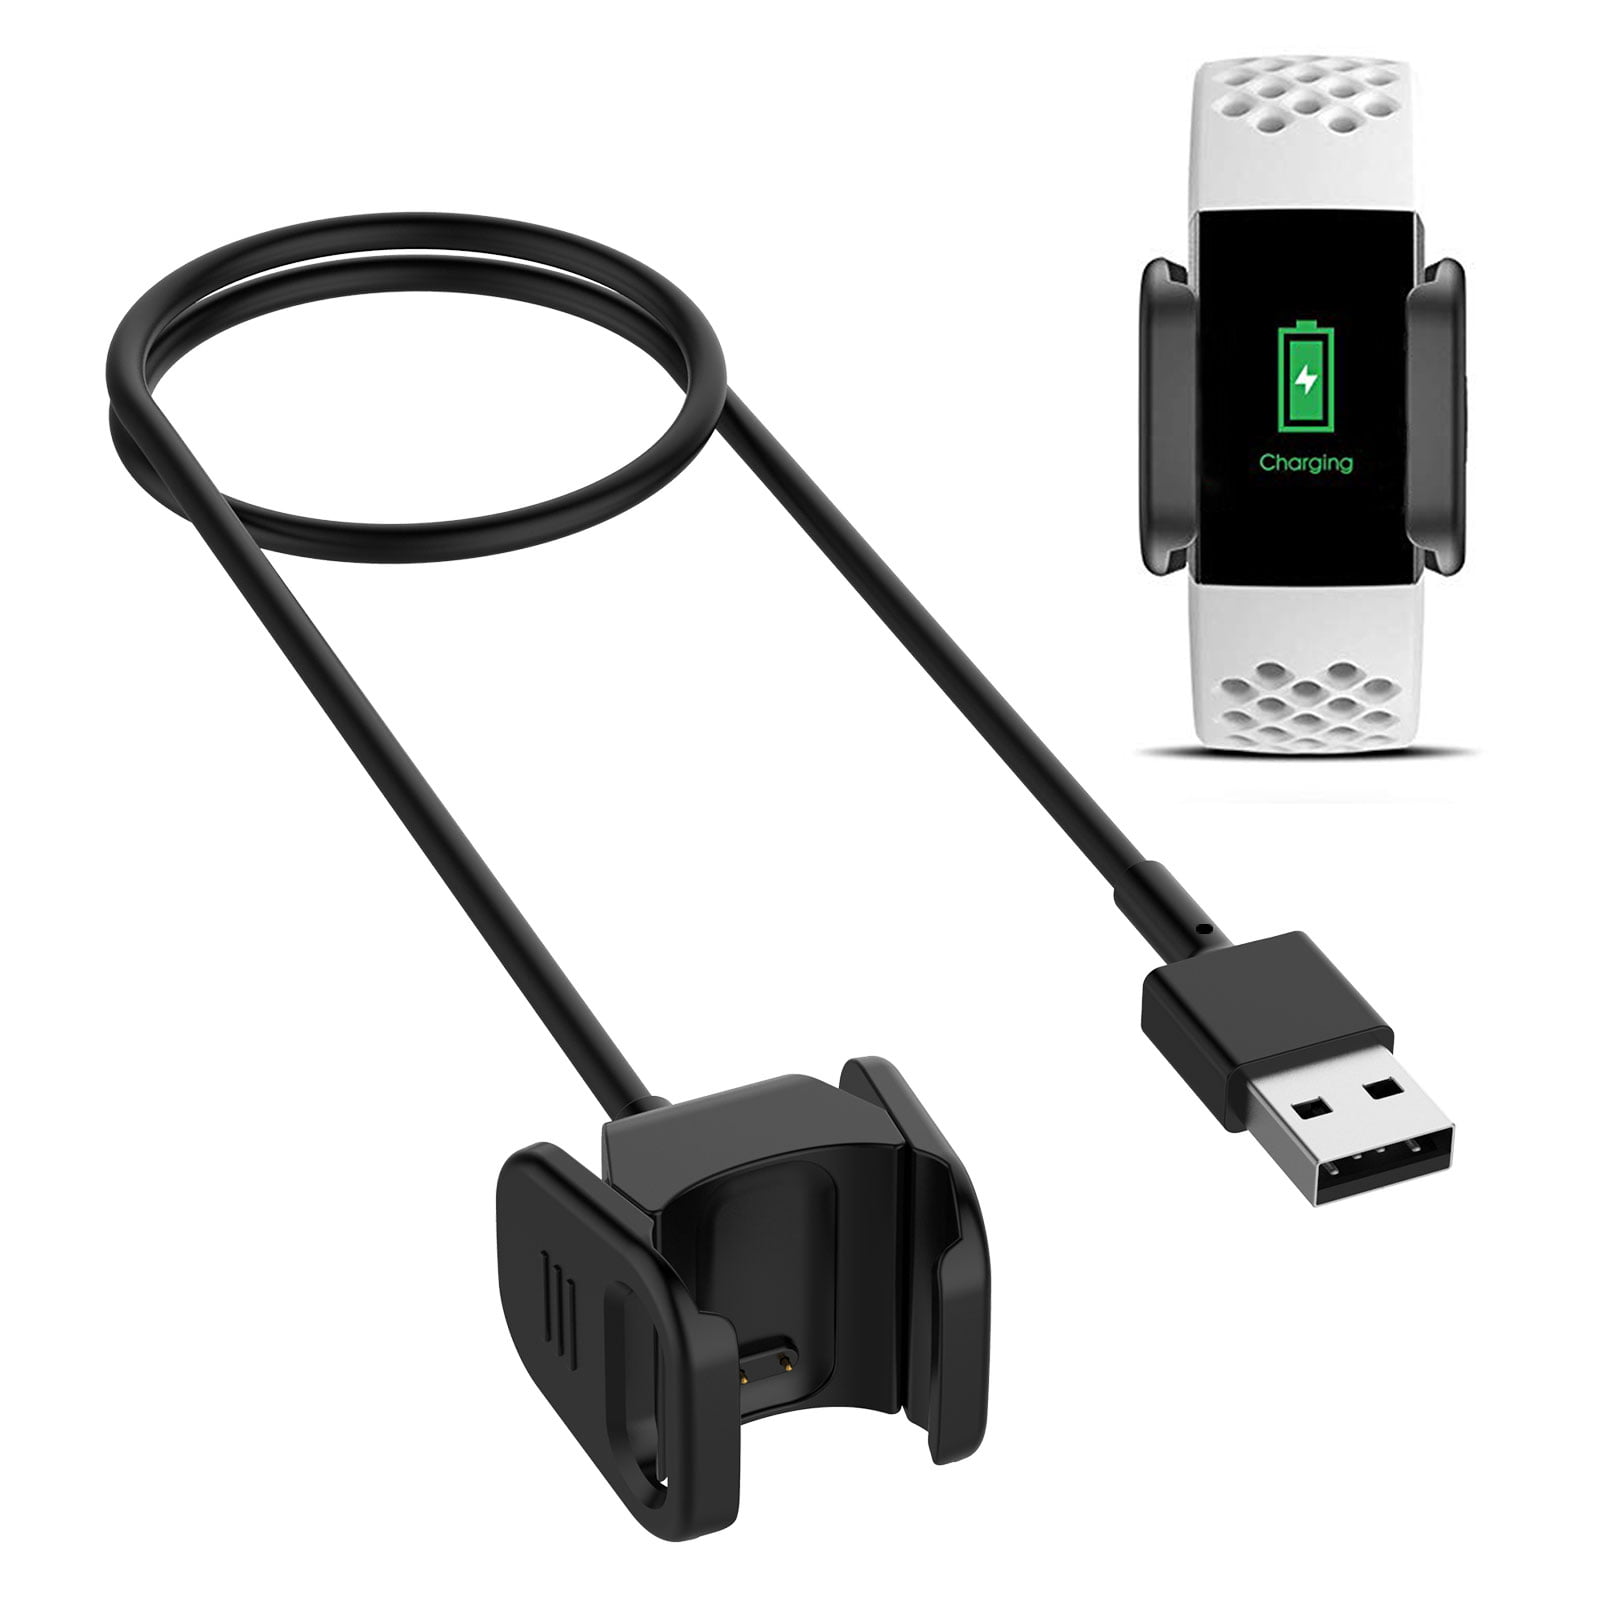 lost my fitbit charger